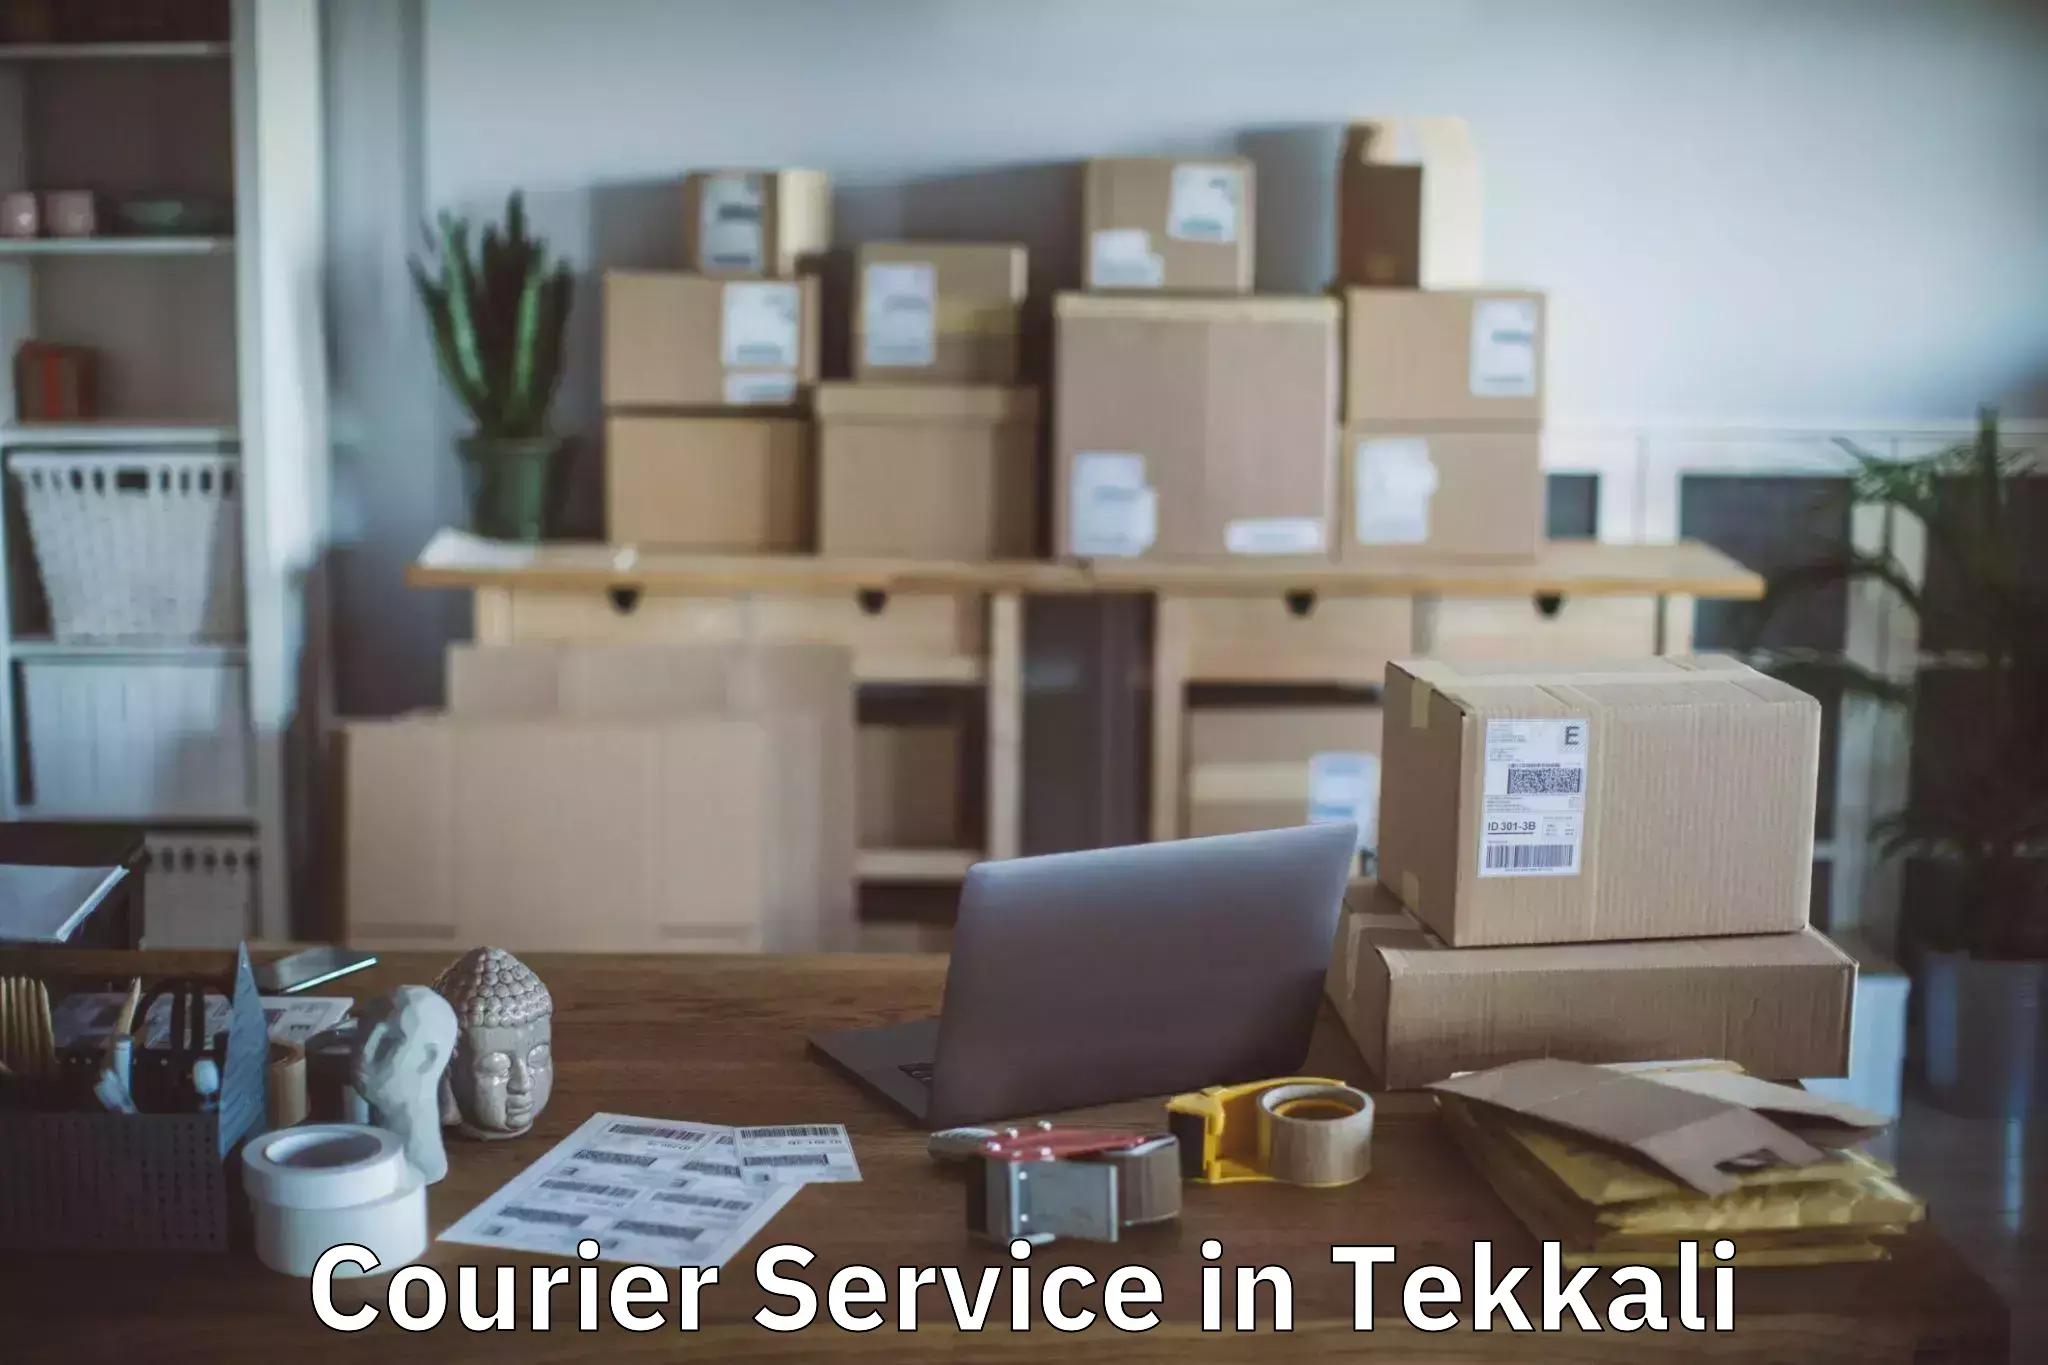 State-of-the-art courier technology in Tekkali